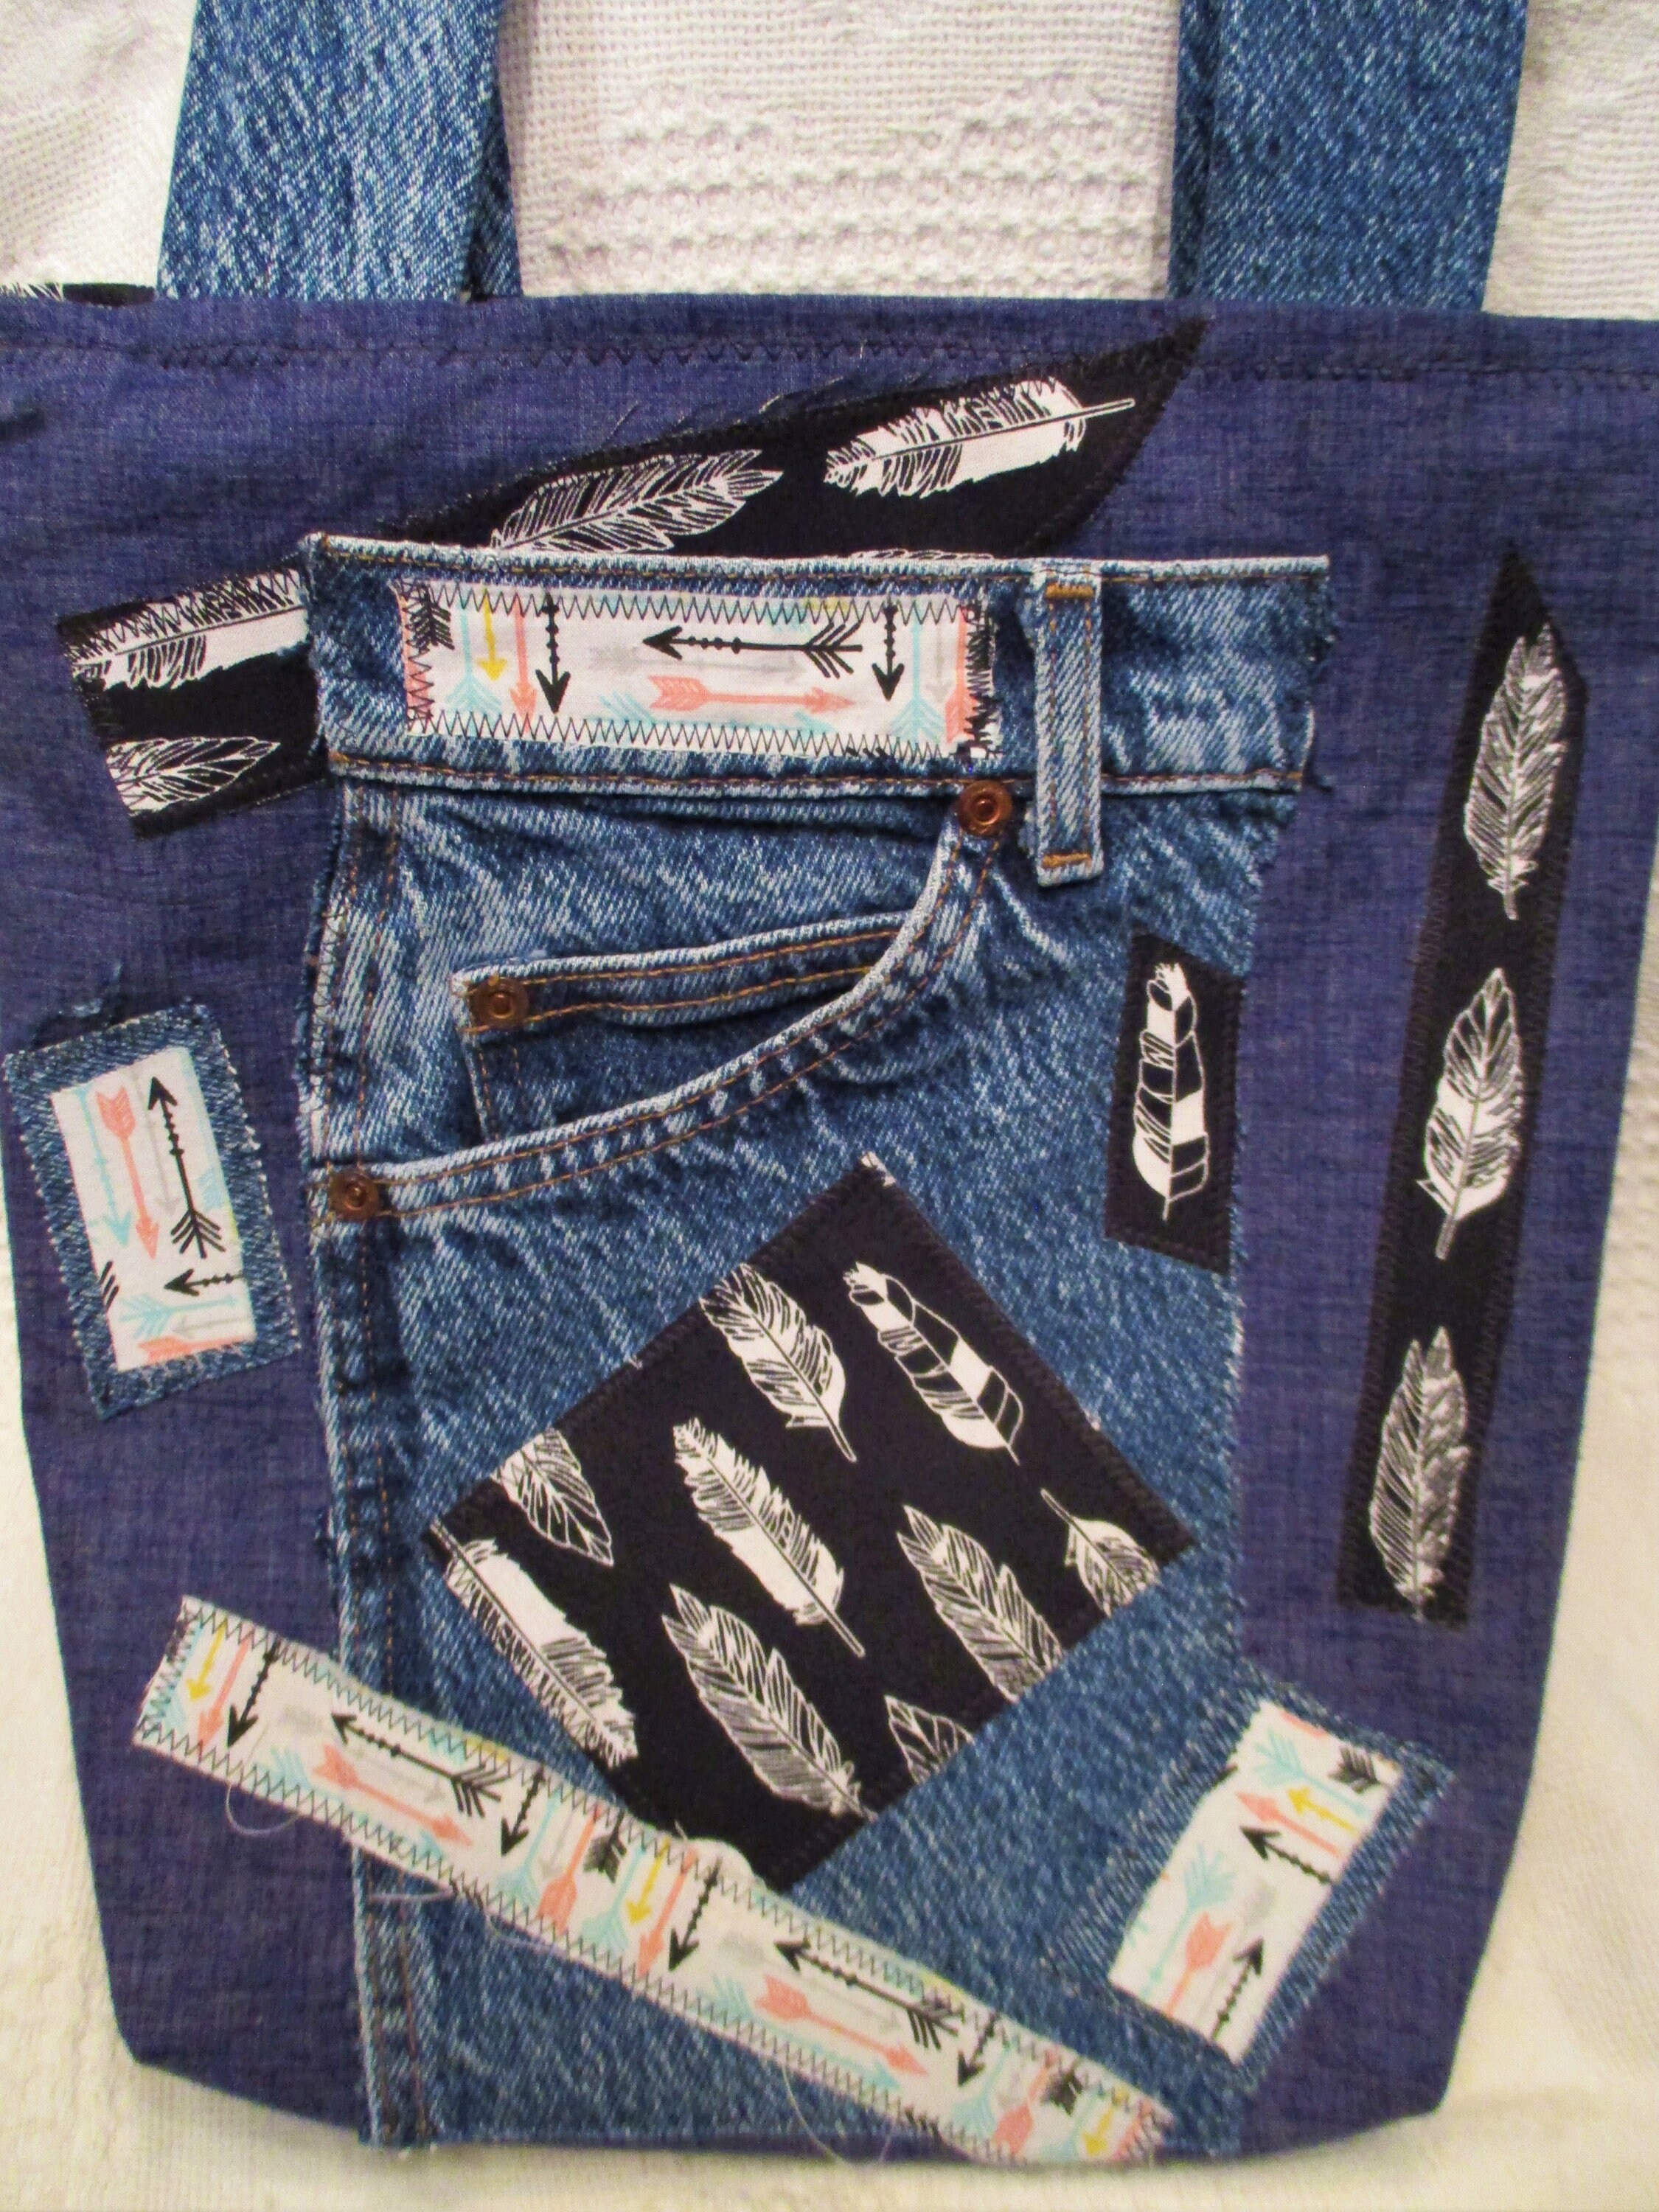 Jean Denim Scrappy Bag Upcycled With Lee Jeans and Other - Etsy